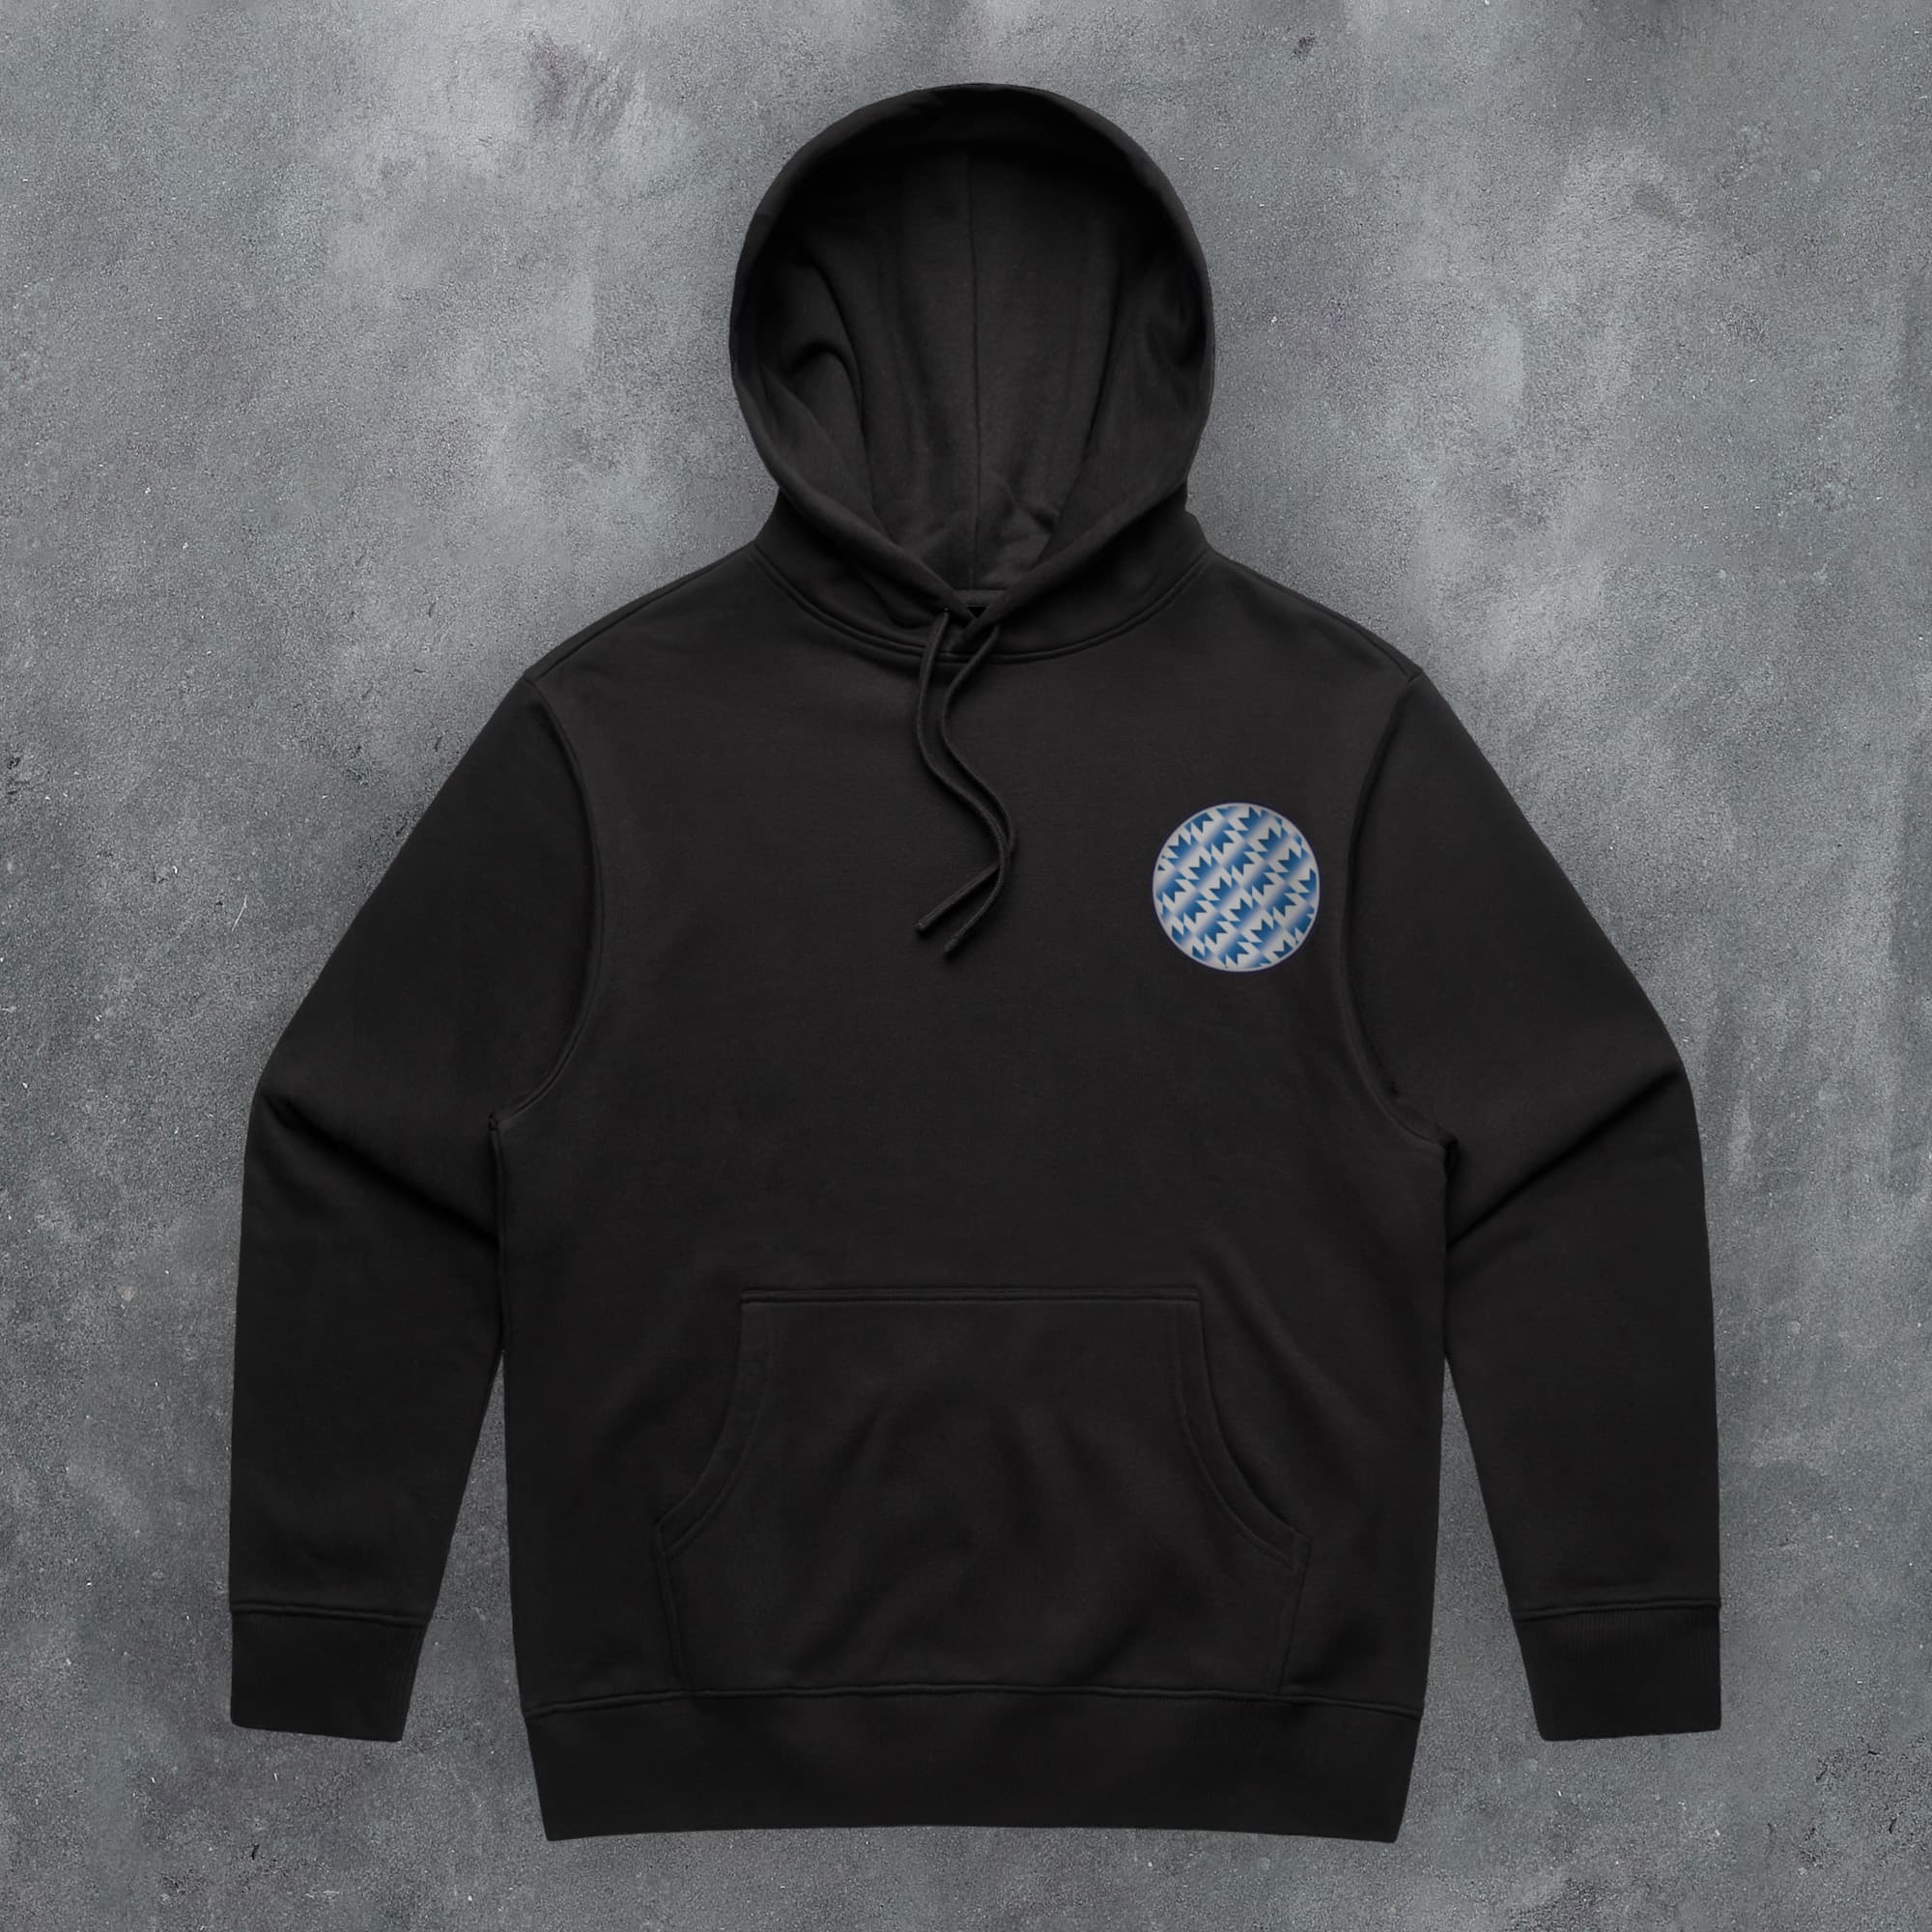 a black hoodie with a blue checkered circle on it